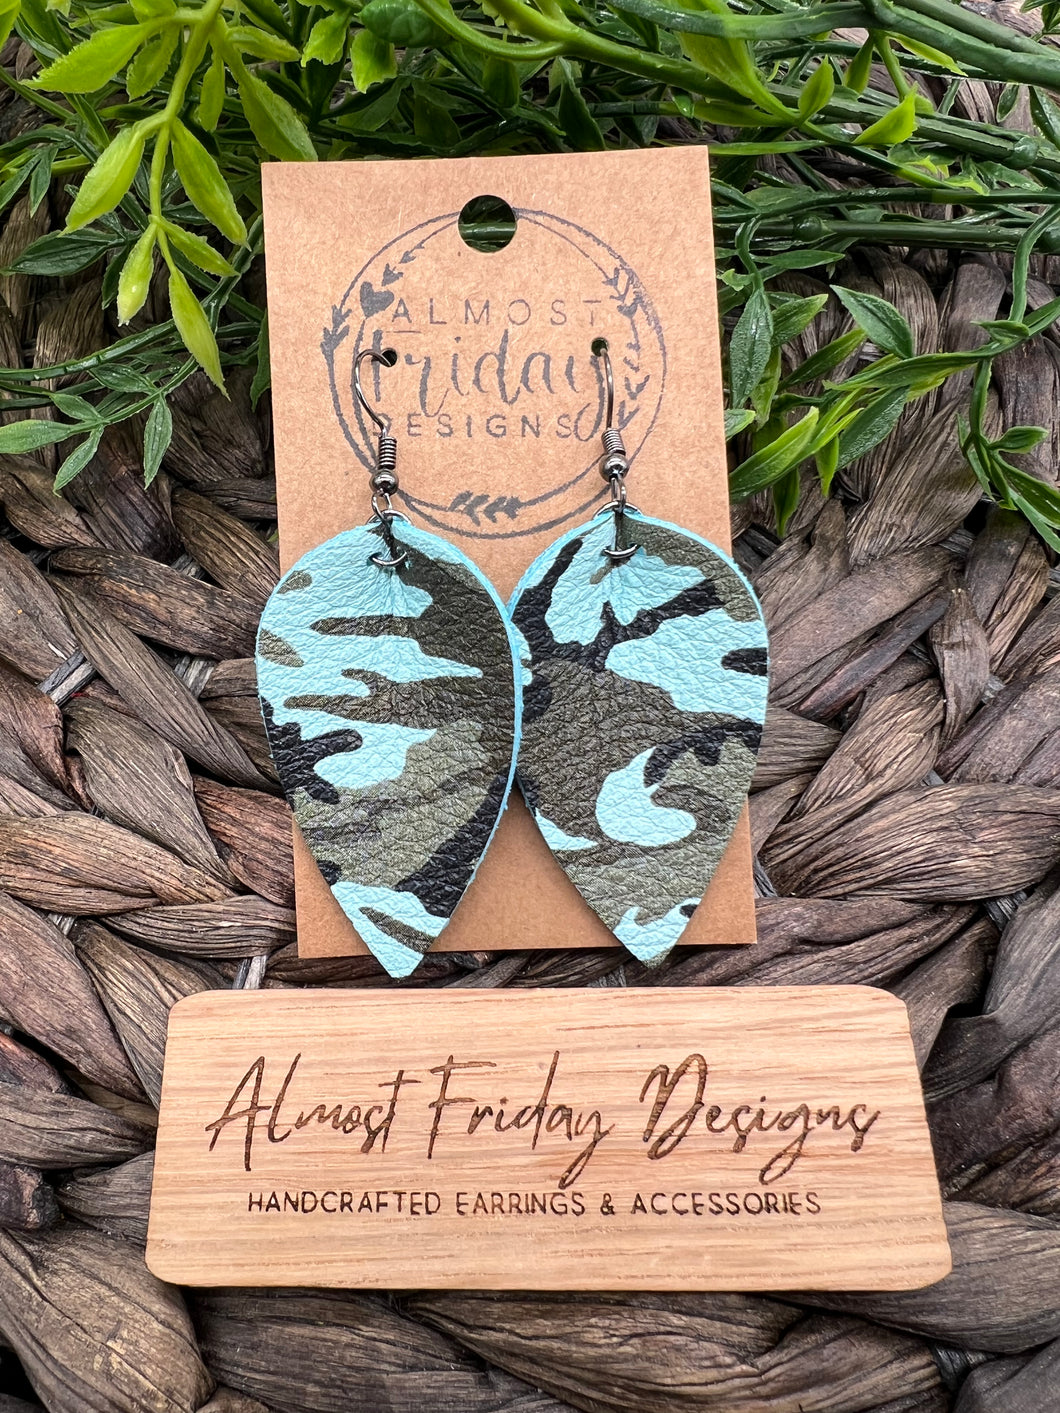 Genuine Leather Earrings - Camouflage - Camo - Aqua - Green - Black - Pinched Leaf - Camouflage Earrings - Army